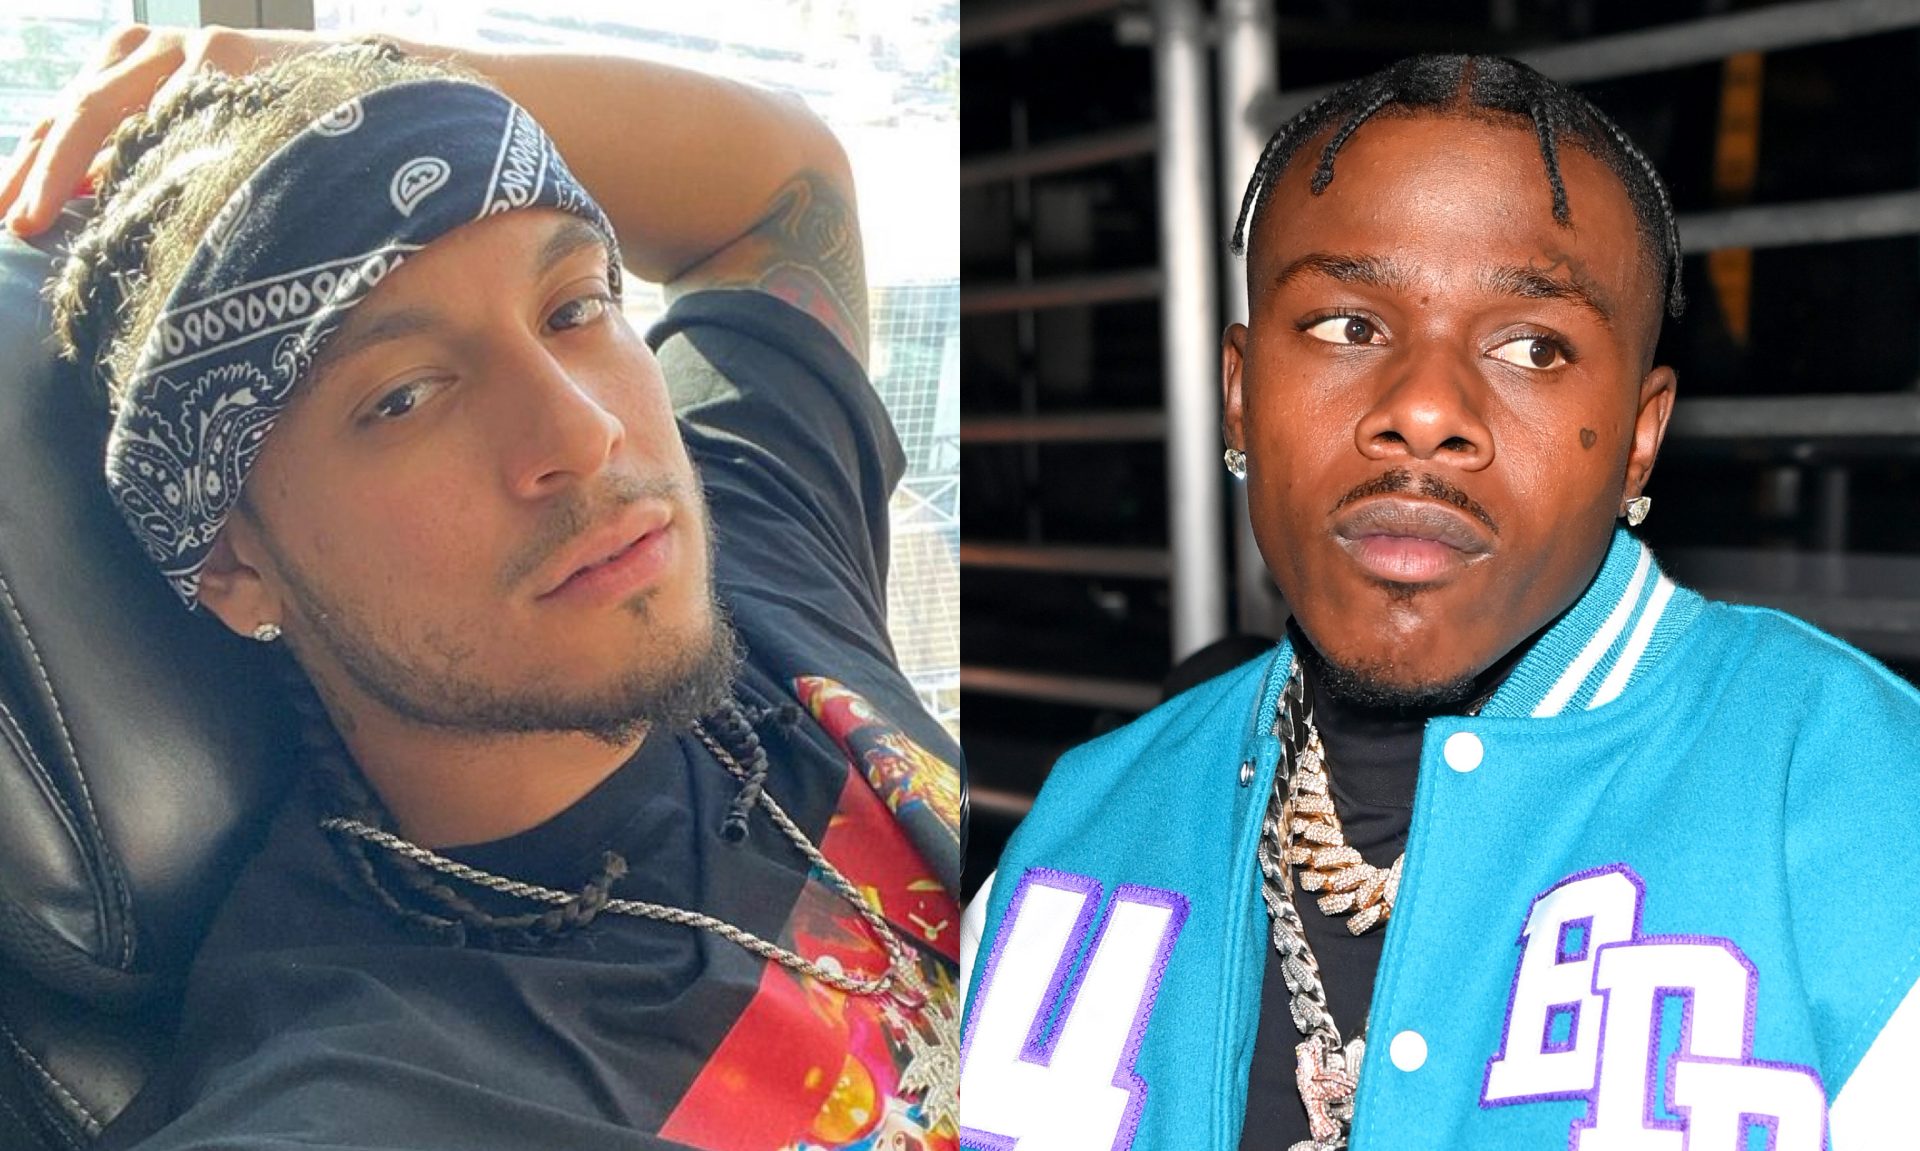 Brandon Bills Stops Cooperating With Police During Investigation Into Bowling Alley Brawl With DaBaby